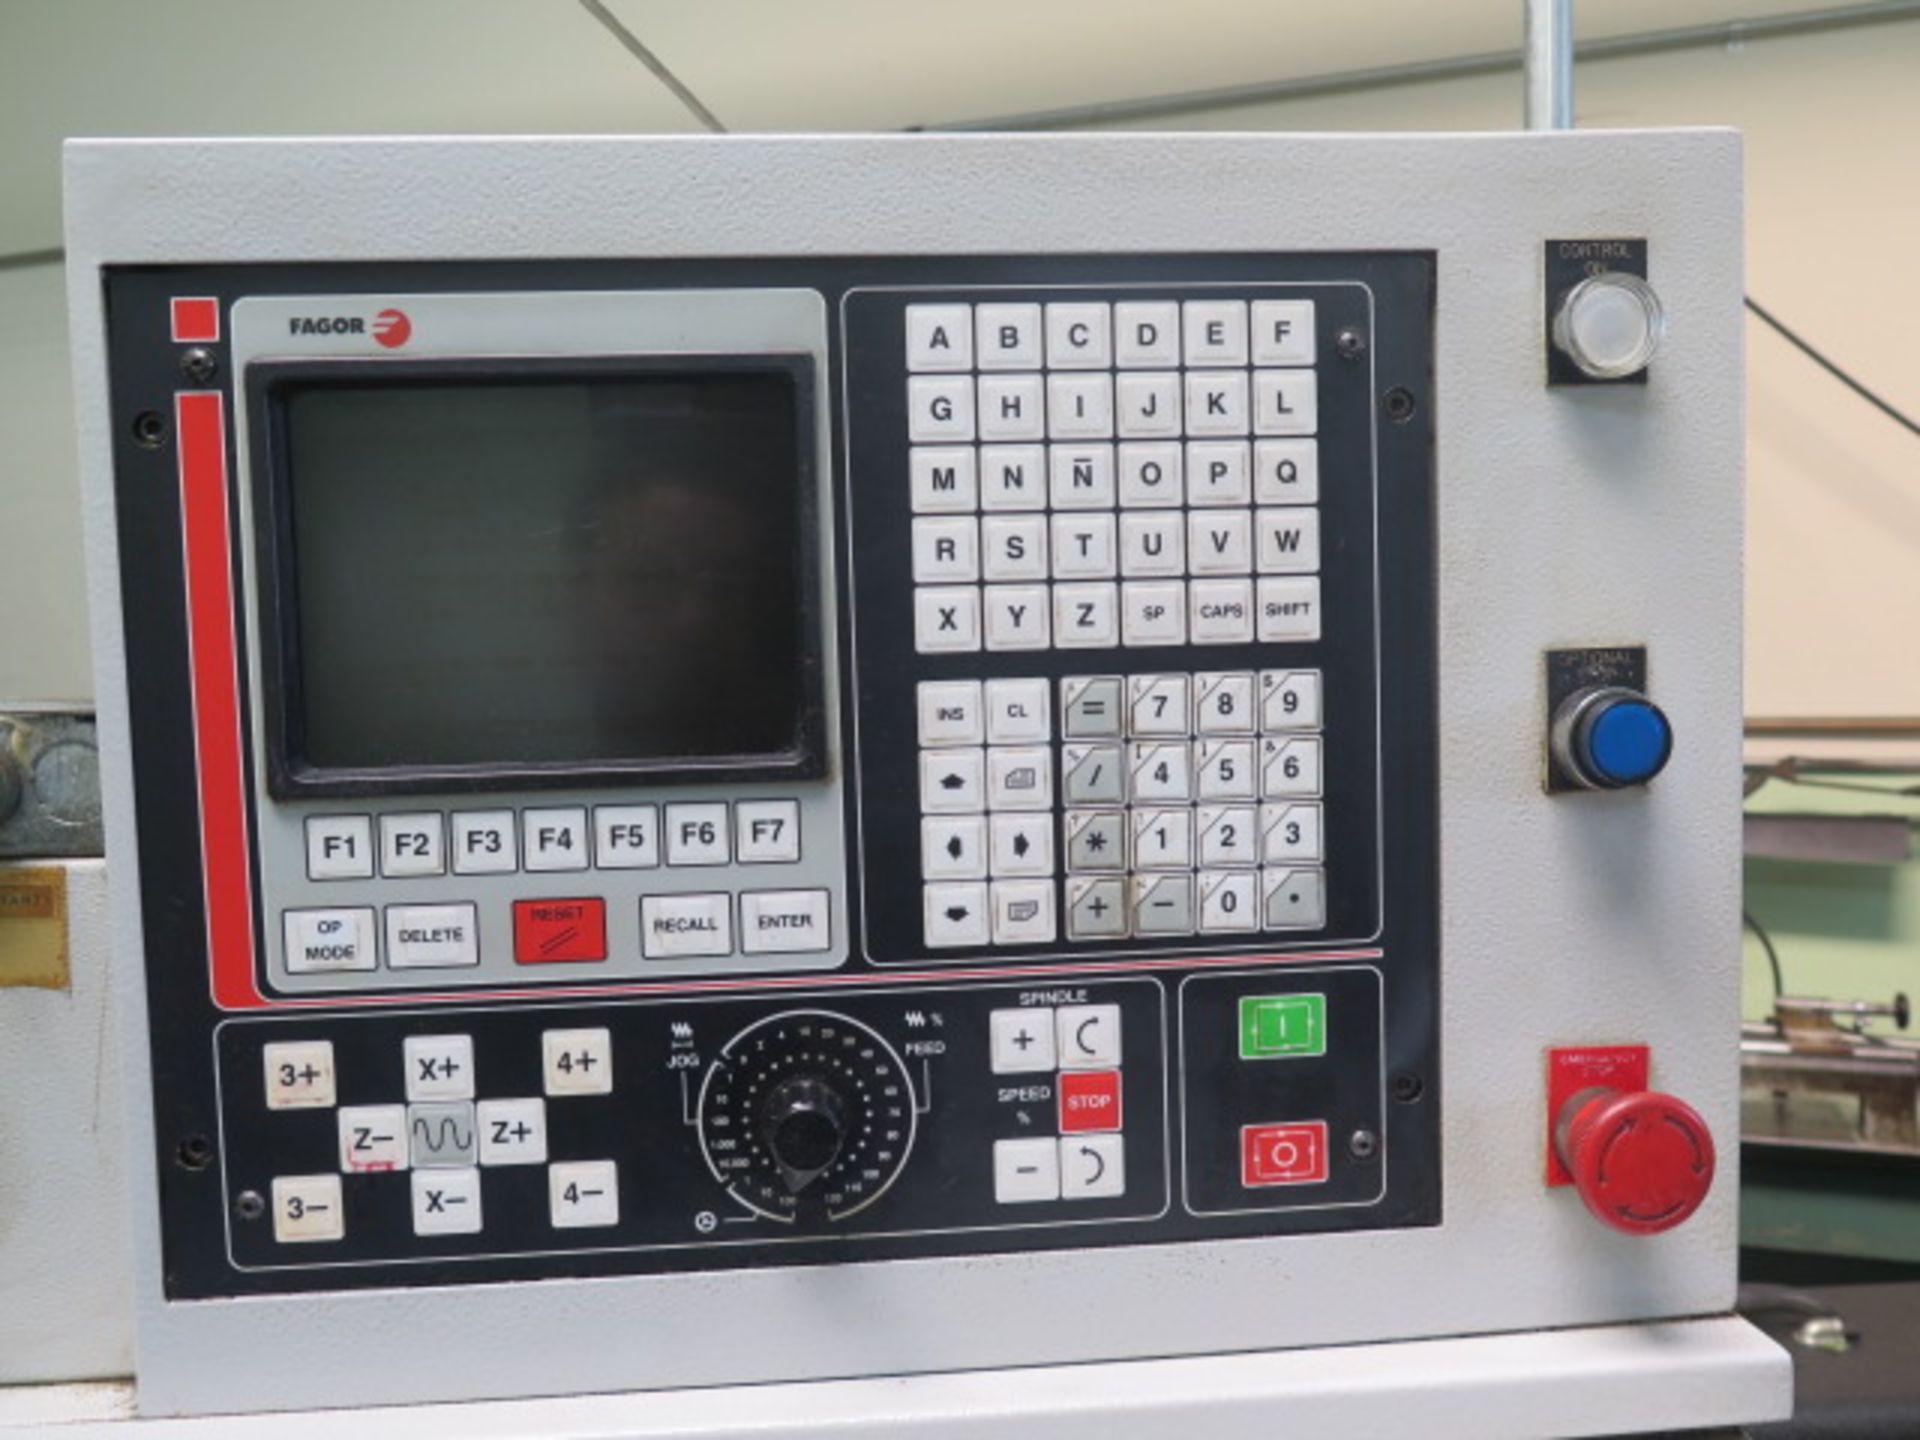 Upgrade Technologies Accuturn GT27 CNC Cross Slide Turning Center w/ Fagor Controls, 4500 RPM, 5C - Image 9 of 13